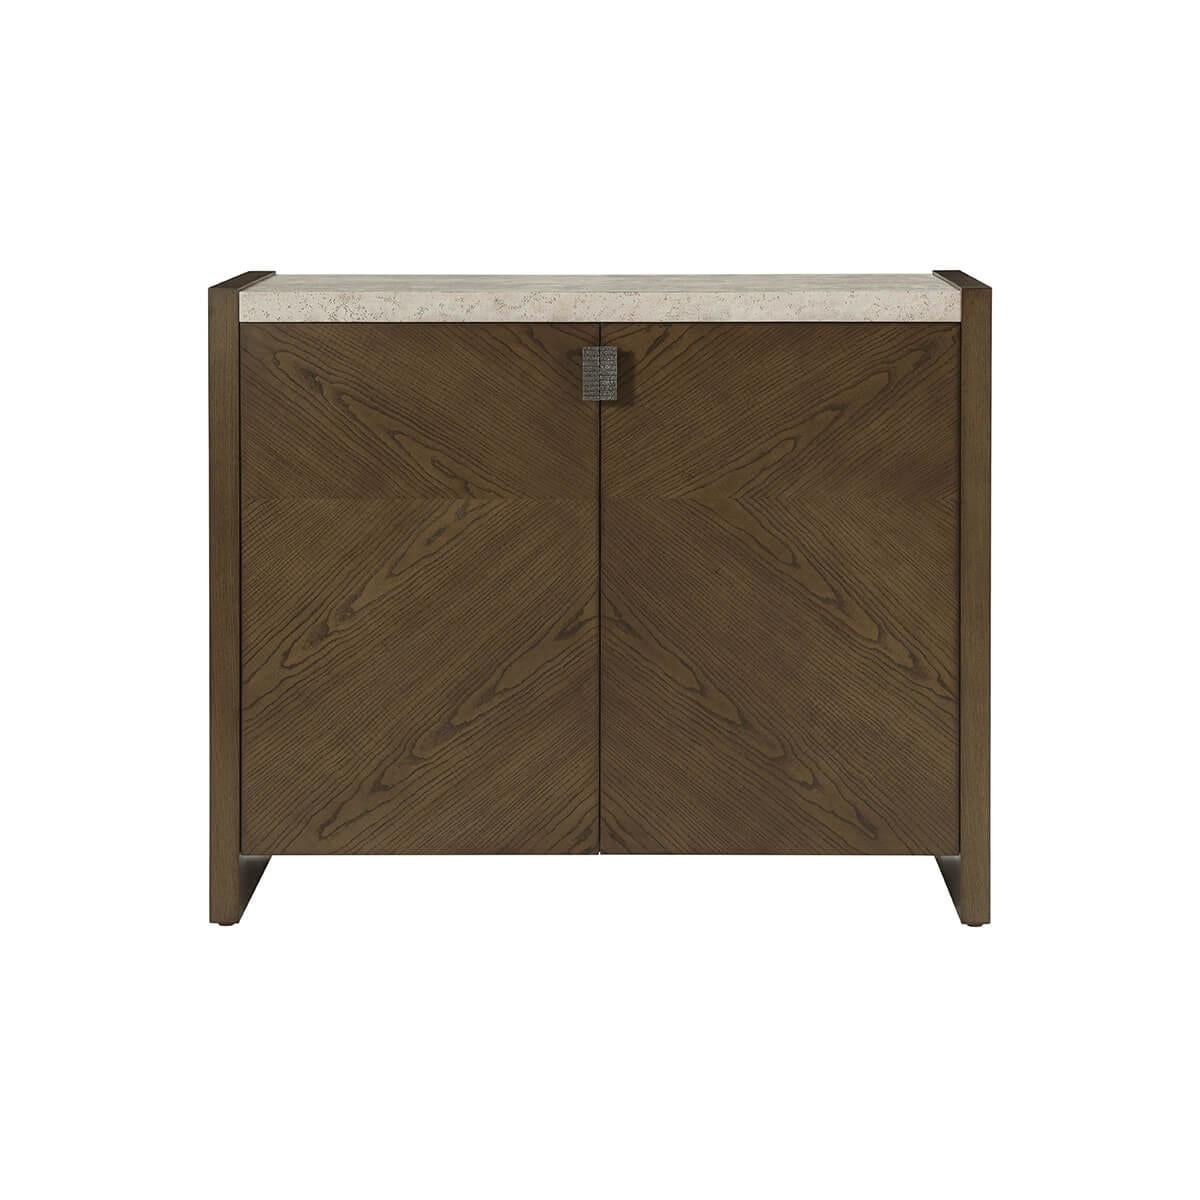 A the two-door cabinet with cathedral ash in our darker earth finish. Completed with textured metal pulls in our new Ember finish and a stone-like porous top in our exclusive Mineral finish. Includes an adjustable shelf.
Dimensions: 46